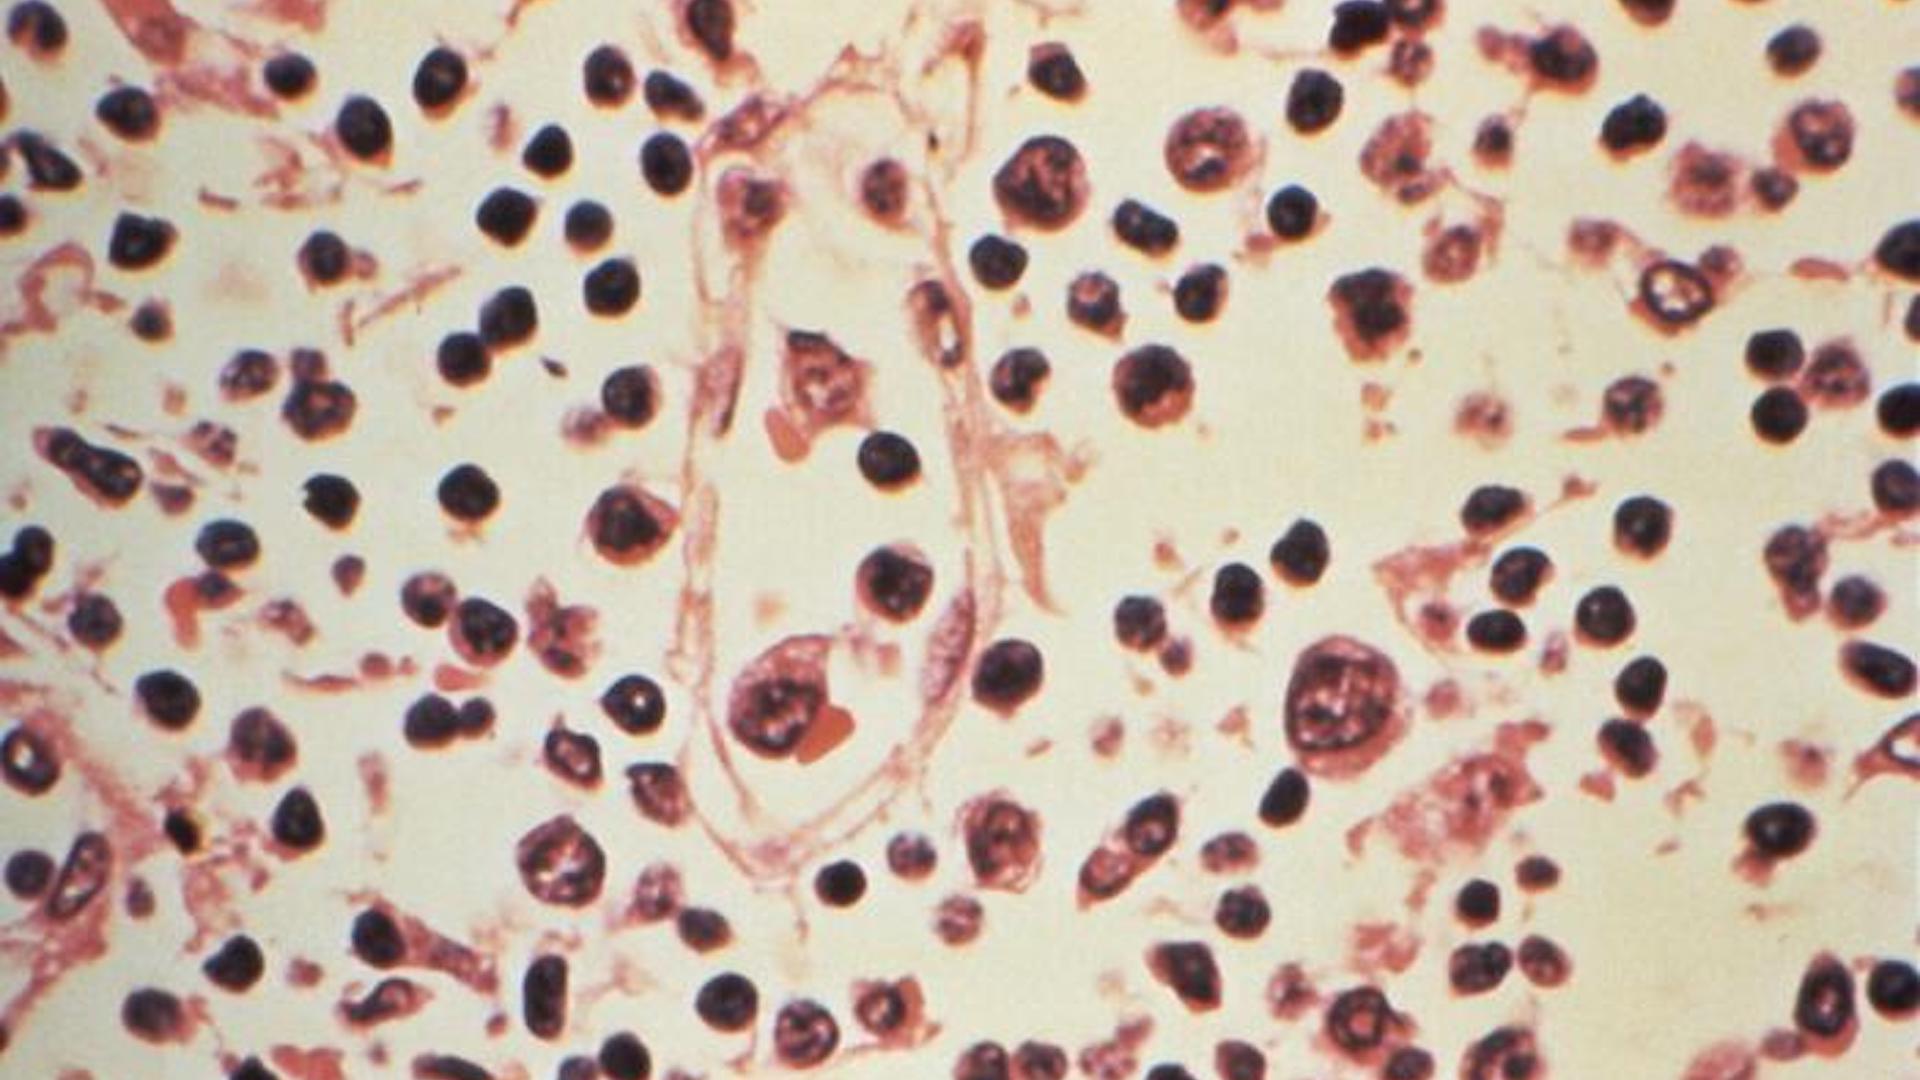 A laboratory image of lymph node sampled from a person with a hantavirus infection